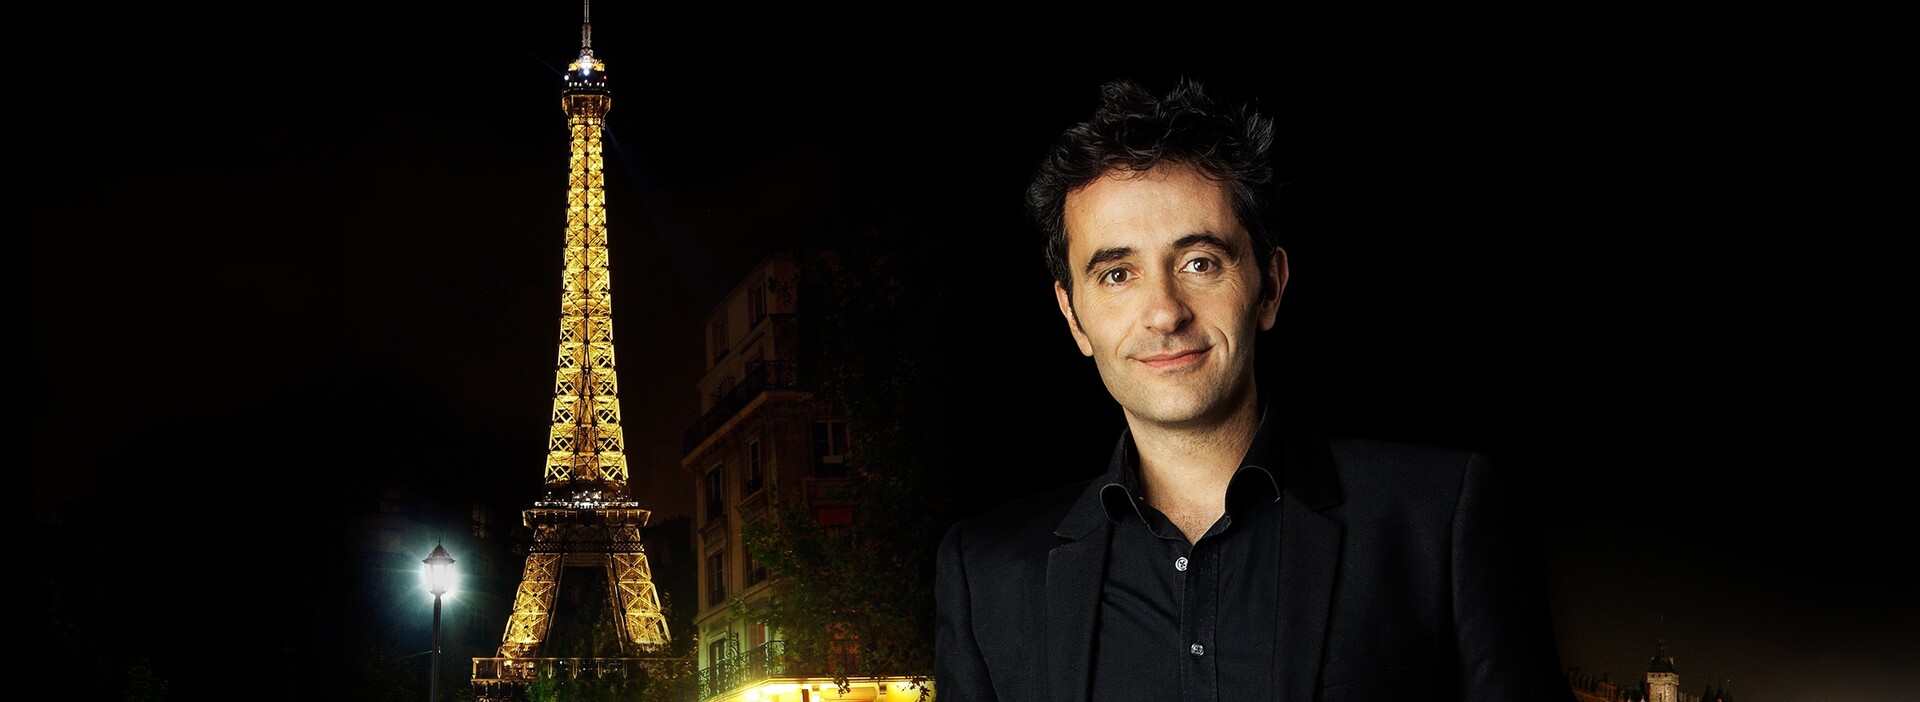 Olivier Giraud “How to become a parisian in one hour?“